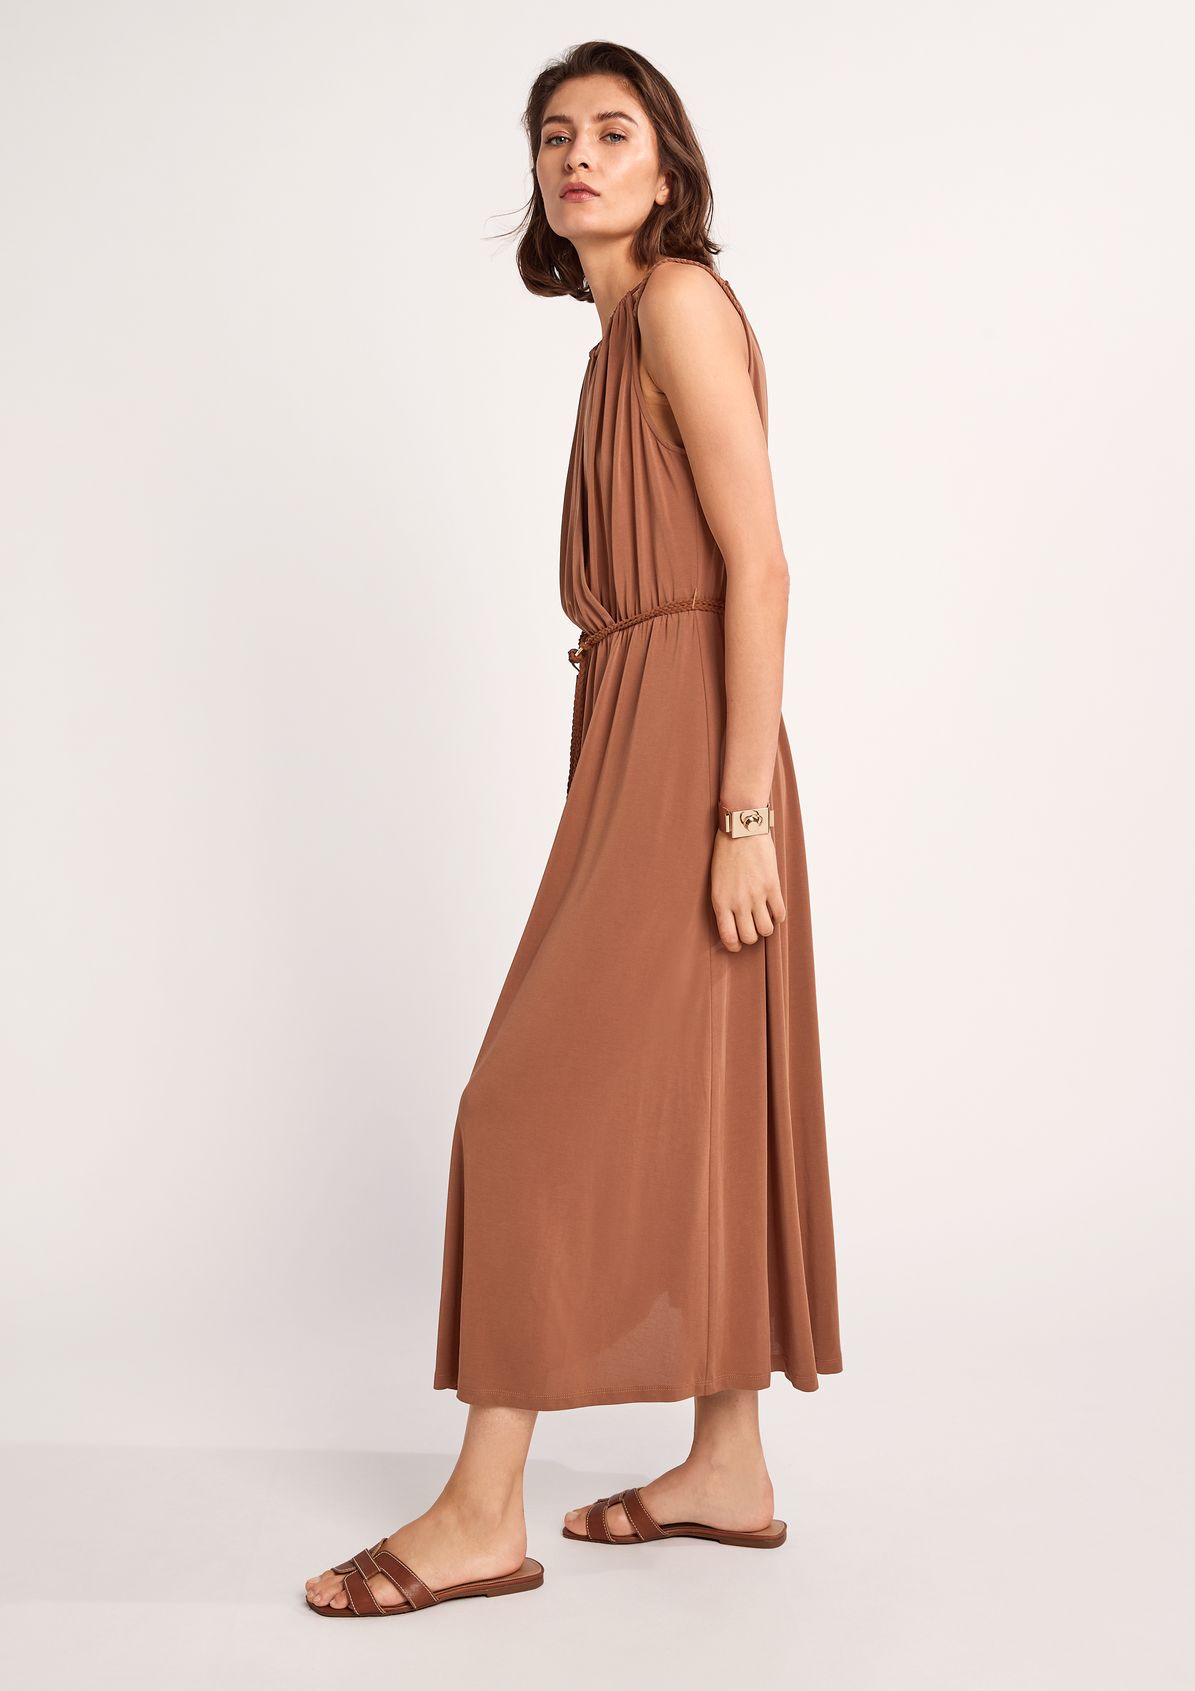 Blended modal dress with a braided belt from comma